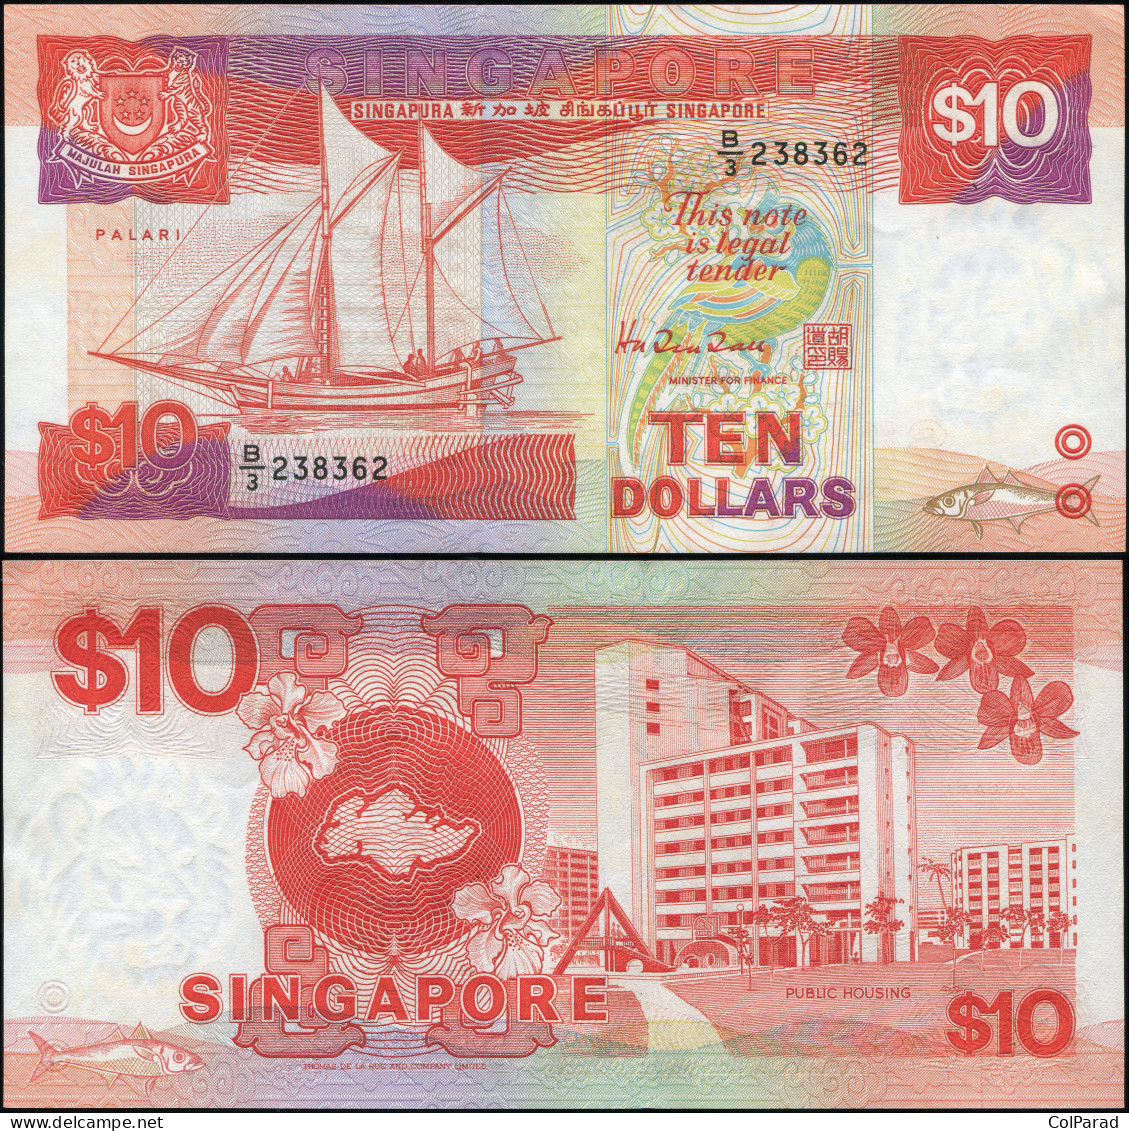 SINGAPORE 10 DOLLARS - ND (1988) - Paper Unc - P.20a Banknote - Singapore